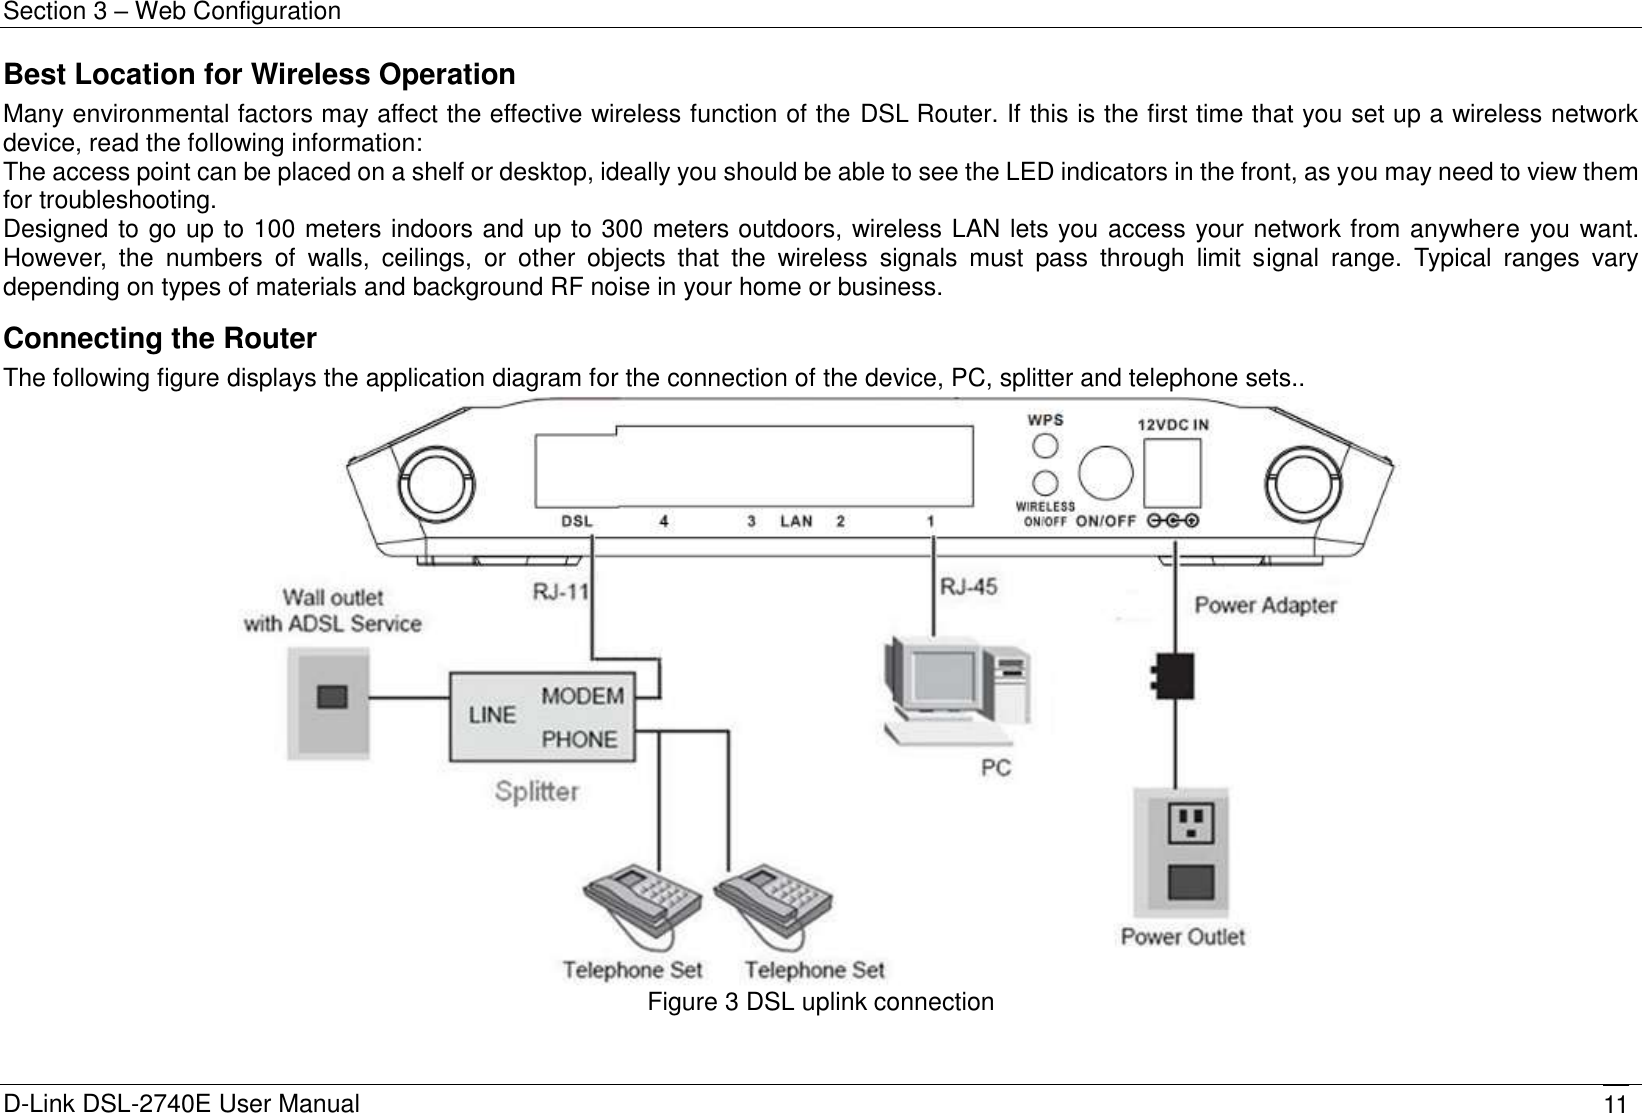 Section 3 – Web Configuration D-Link DSL-2740E User Manual 11 Best Location for Wireless Operation Many environmental factors may affect the effective wireless function of the DSL Router. If this is the first time that you set up a wireless network device, read the following information: The access point can be placed on a shelf or desktop, ideally you should be able to see the LED indicators in the front, as you may need to view them for troubleshooting. Designed to go up to 100 meters indoors and up to 300 meters outdoors, wireless LAN lets you access your network from anywhere you want. However,  the  numbers  of  walls,  ceilings,  or  other  objects  that  the  wireless  signals  must  pass  through  limit  signal  range.  Typical  ranges  vary depending on types of materials and background RF noise in your home or business. Connecting the Router The following figure displays the application diagram for the connection of the device, PC, splitter and telephone sets..  Figure 3 DSL uplink connection  